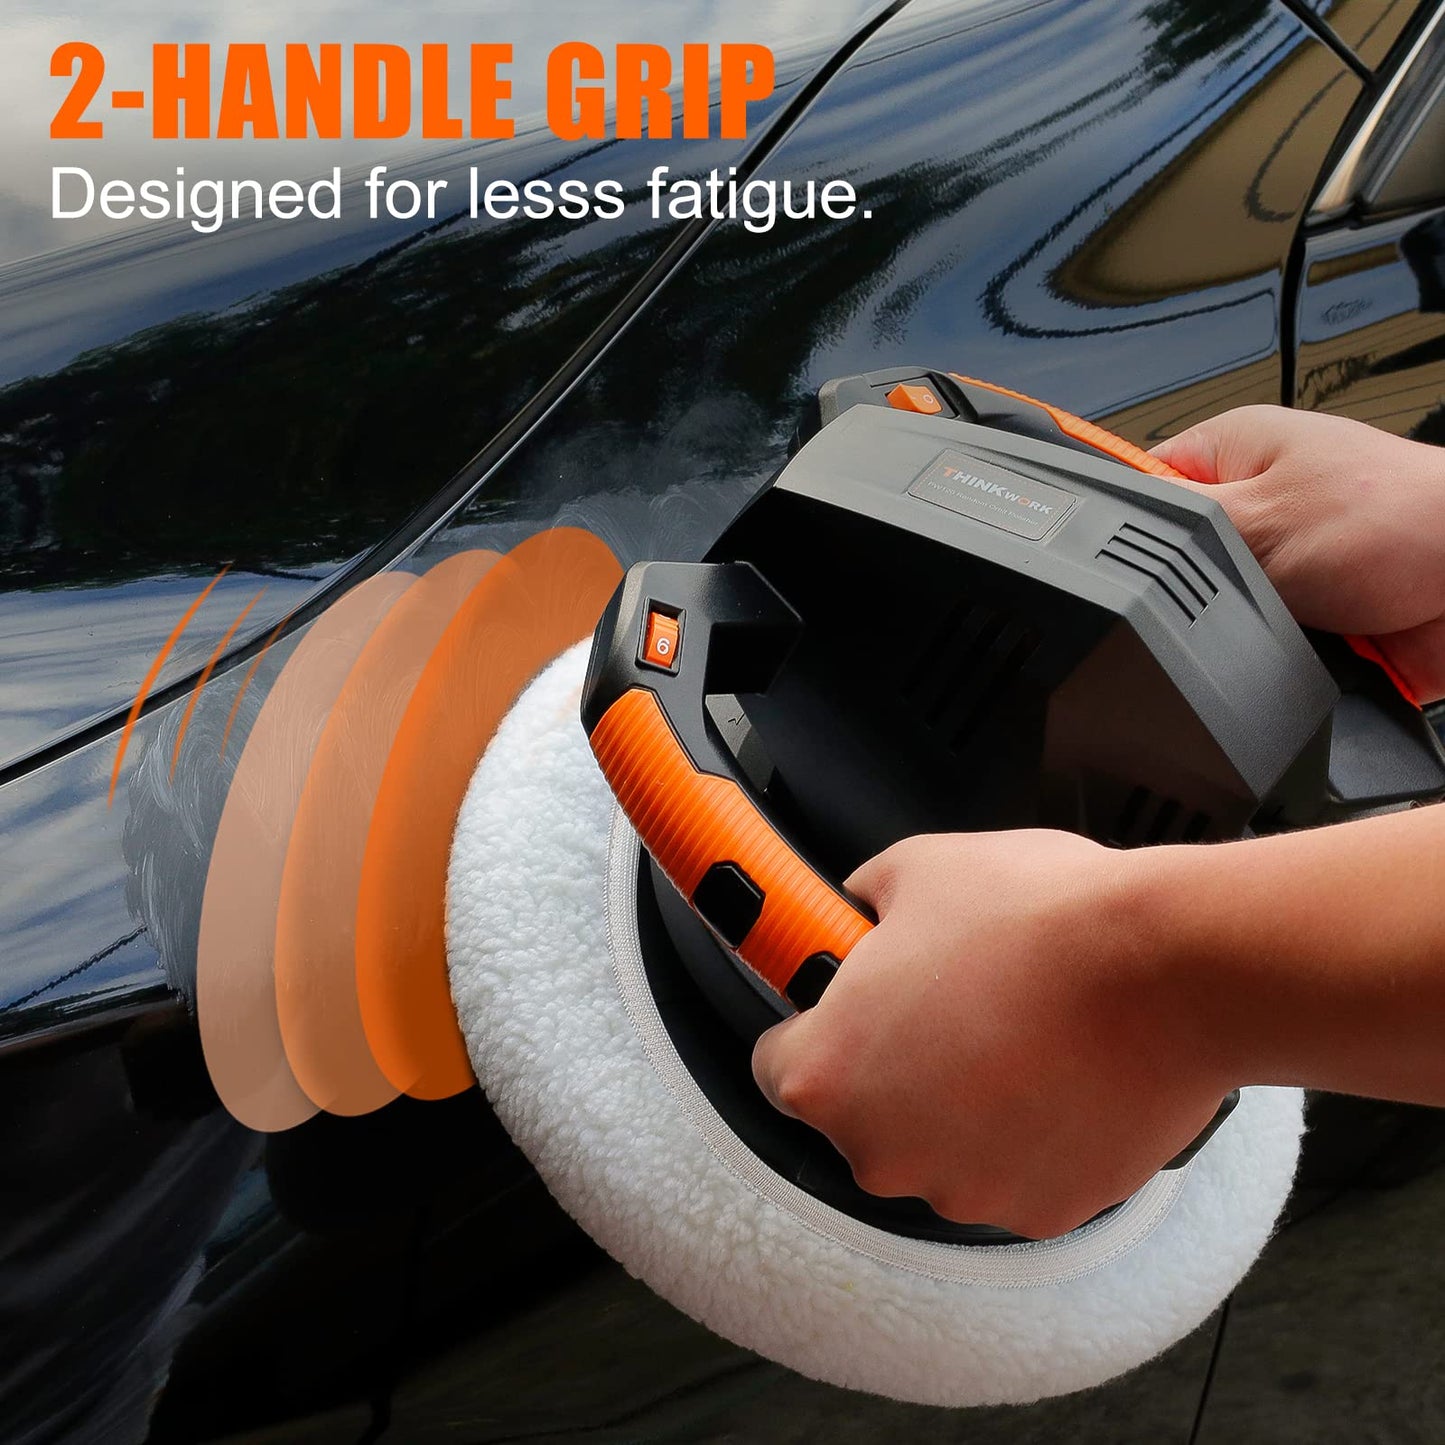 THINKWORK Buffer Polisher,10 Inch Car Polisher Sets with 4 Buffing and Polishing Bonnets,6 Variable Speed 1500-3600 RPM,Double handle, Ideal for Car